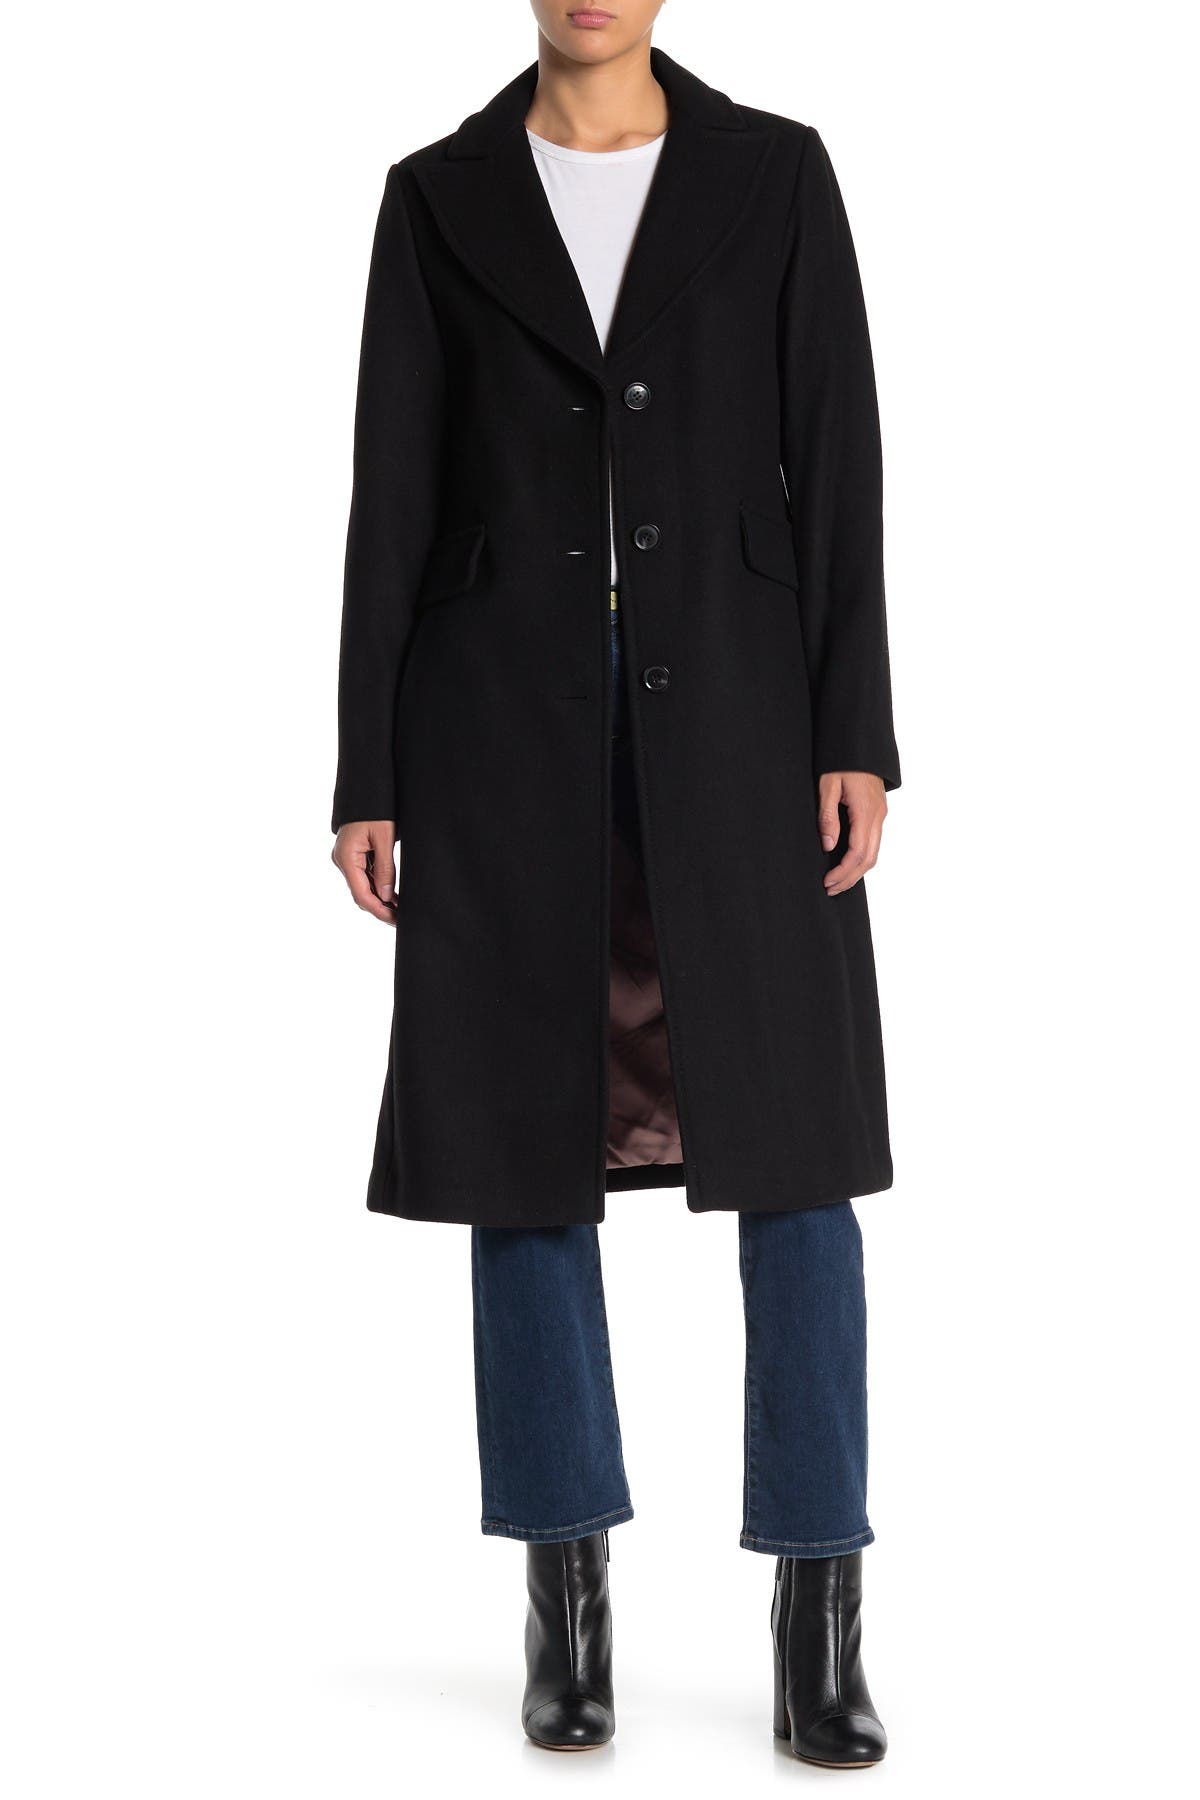 Kate Spade New York Coat Online Store, UP TO 58% OFF | www 